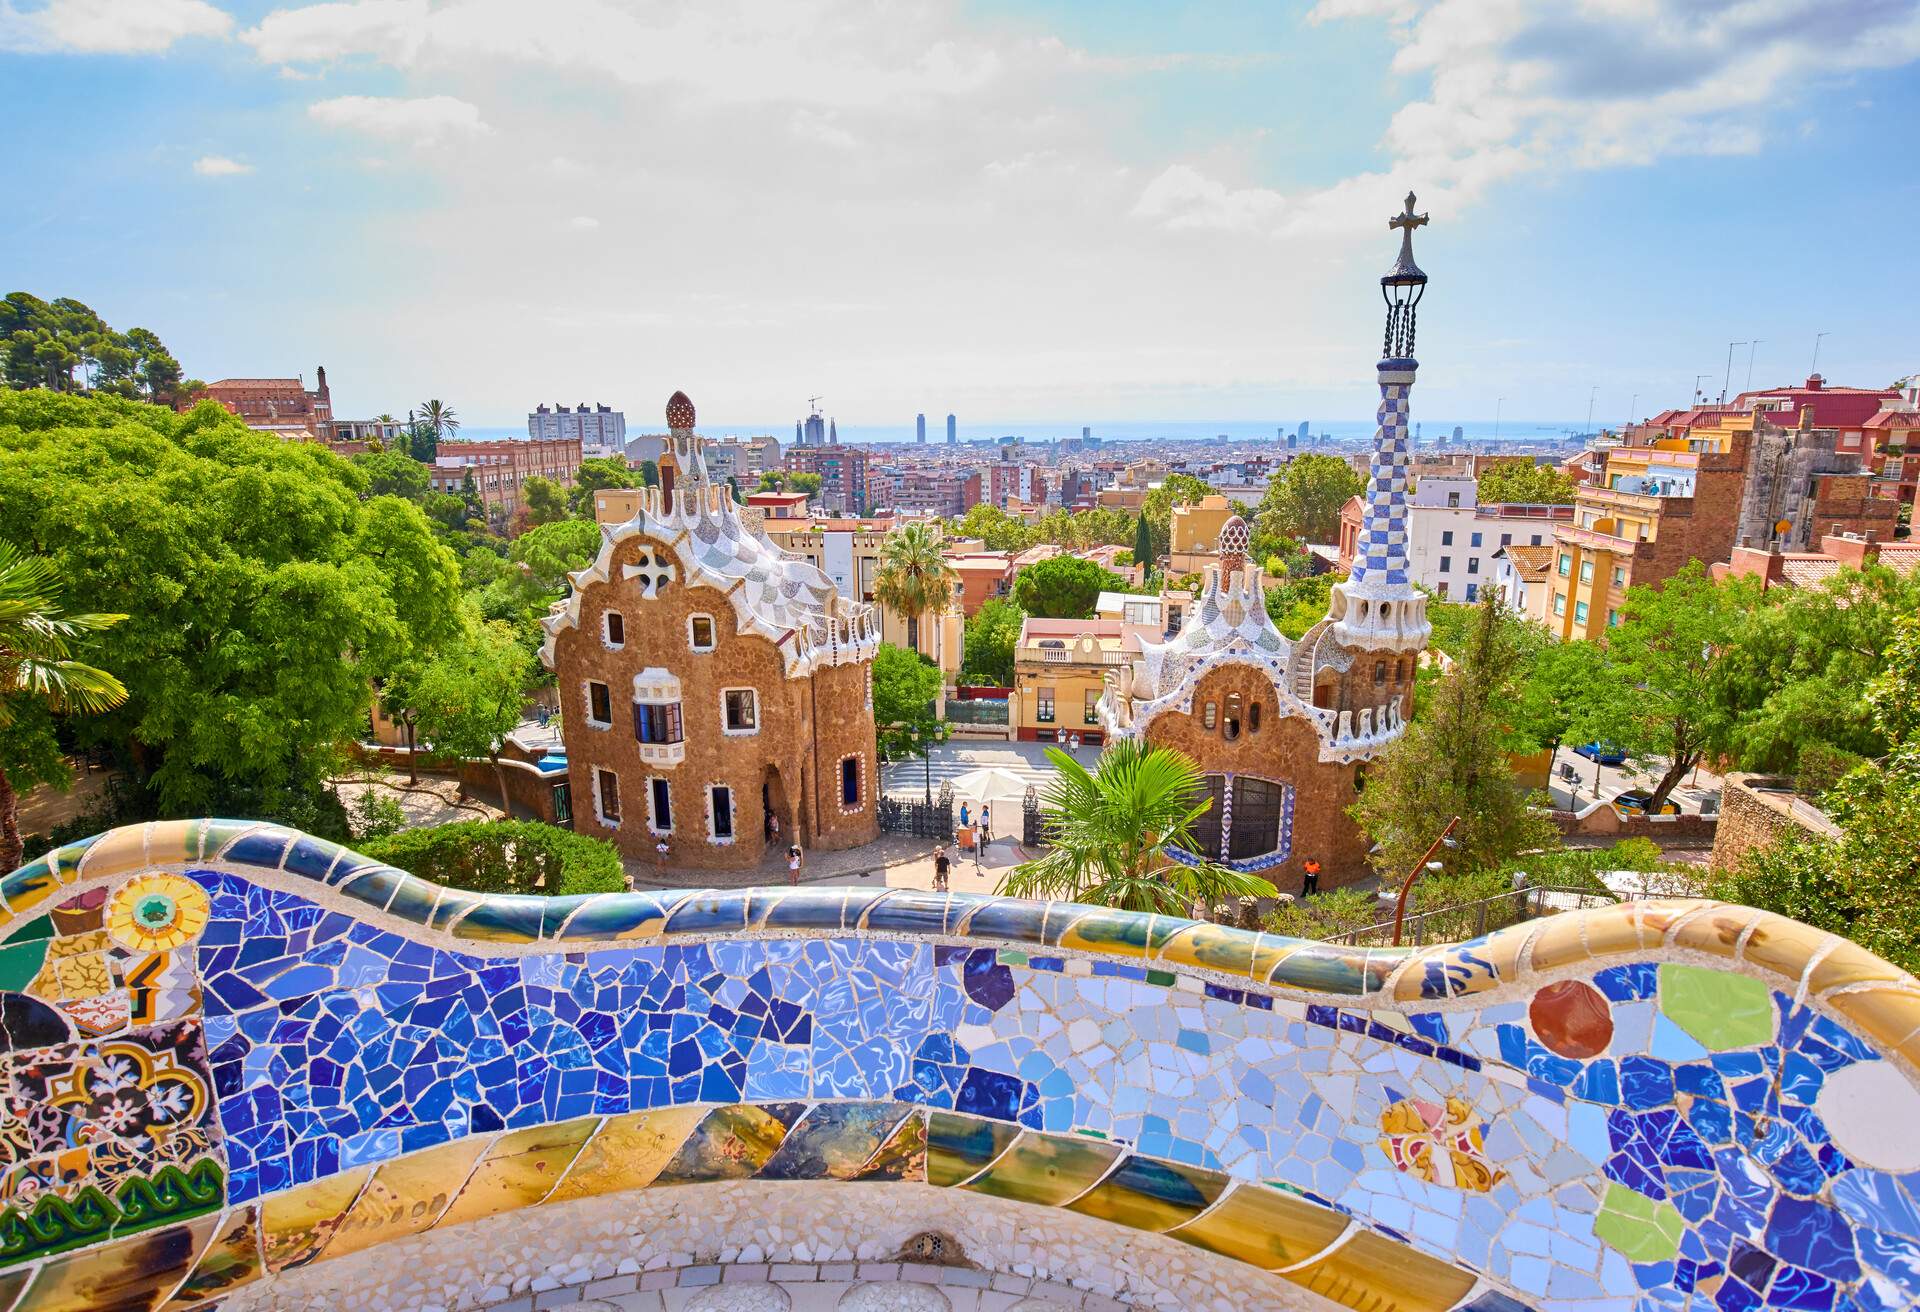 A balcony adorned with a mosaic of colourful tiles overlooks Park Güell, a park with uniquely-designed structures surrounded by trees.